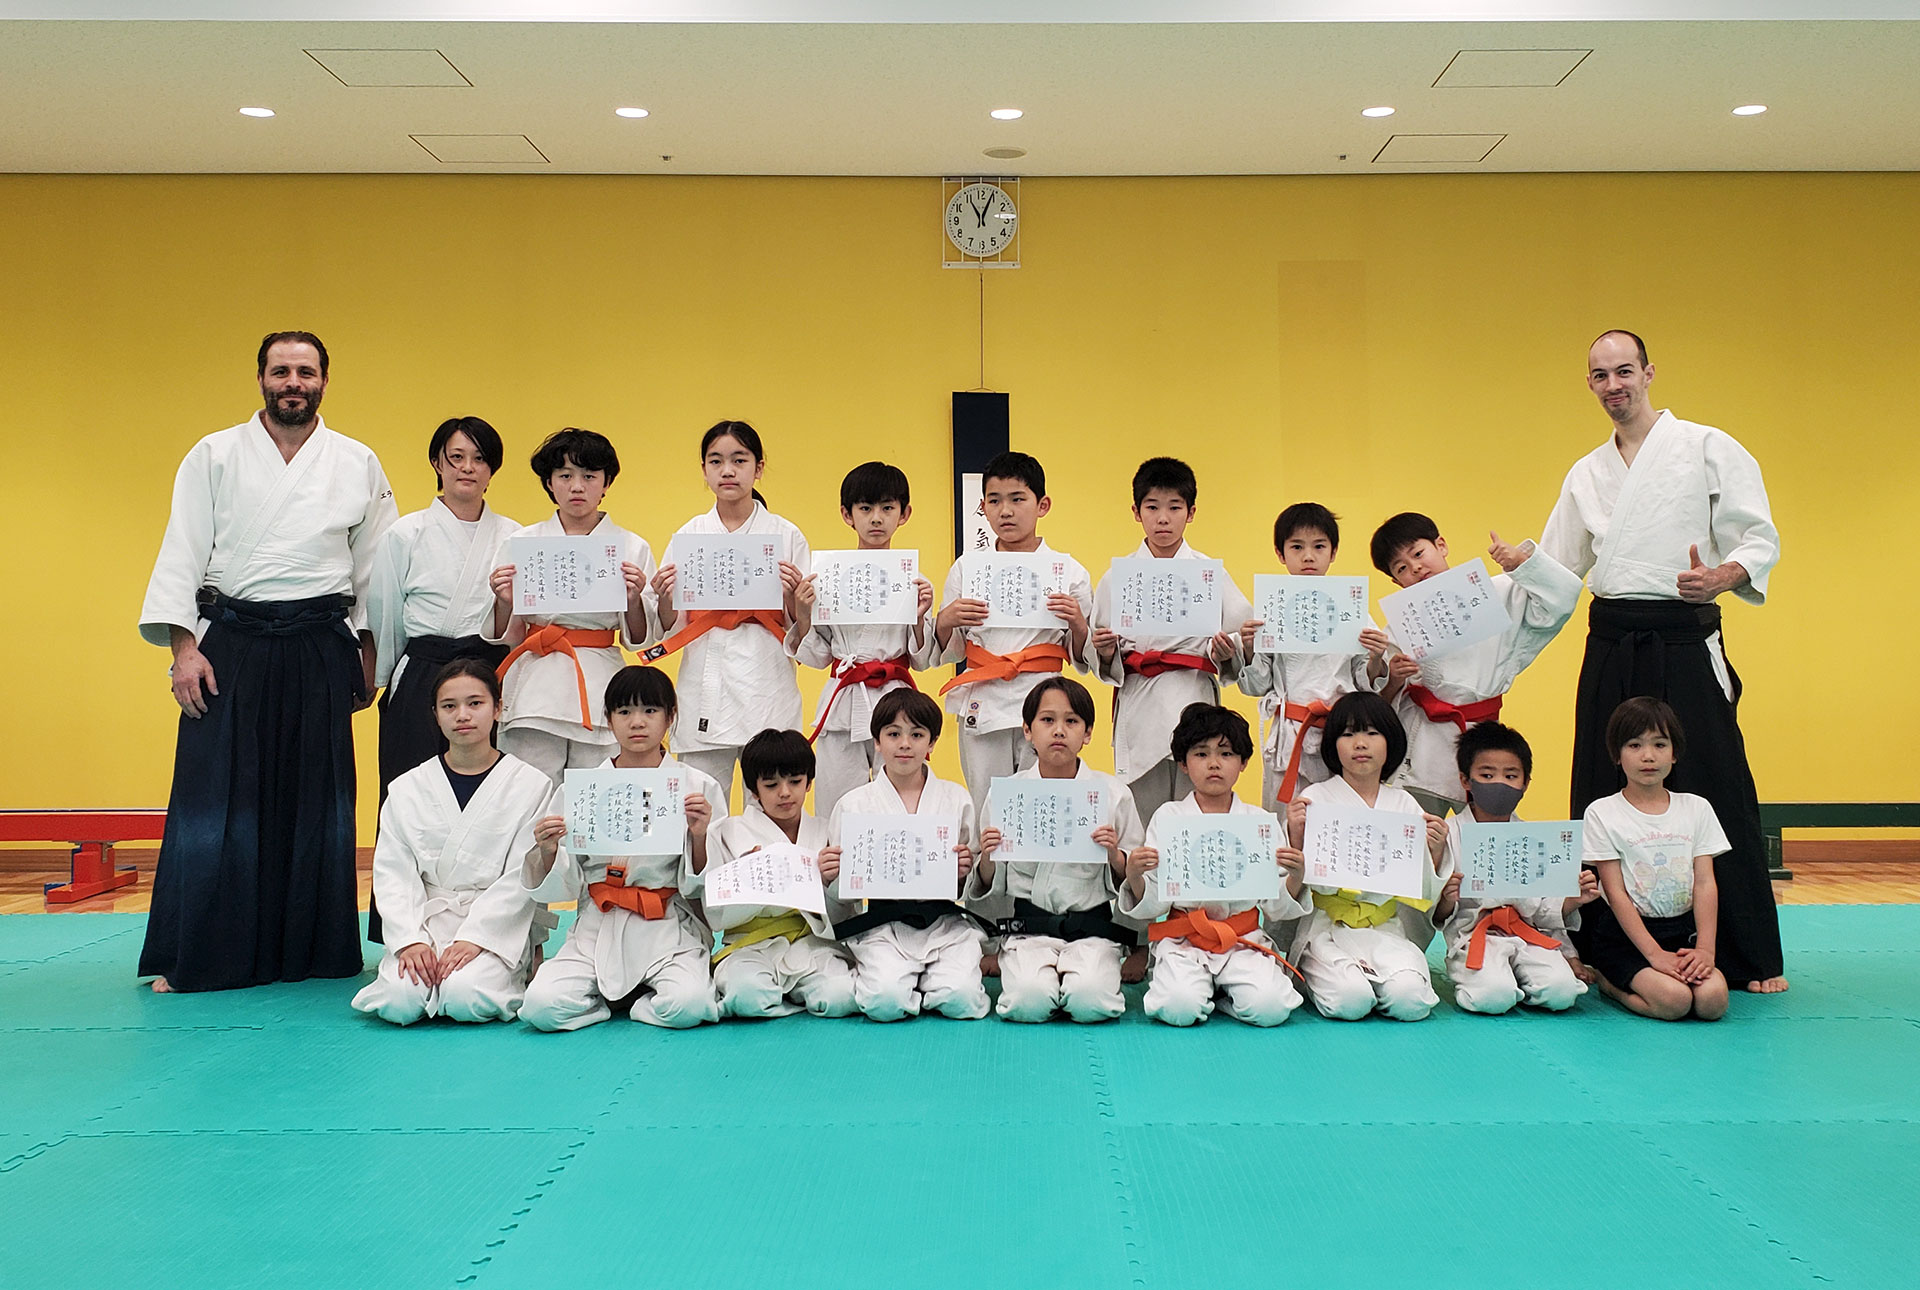 Sixteen children successfully reach new rank during yearly kyu examinations